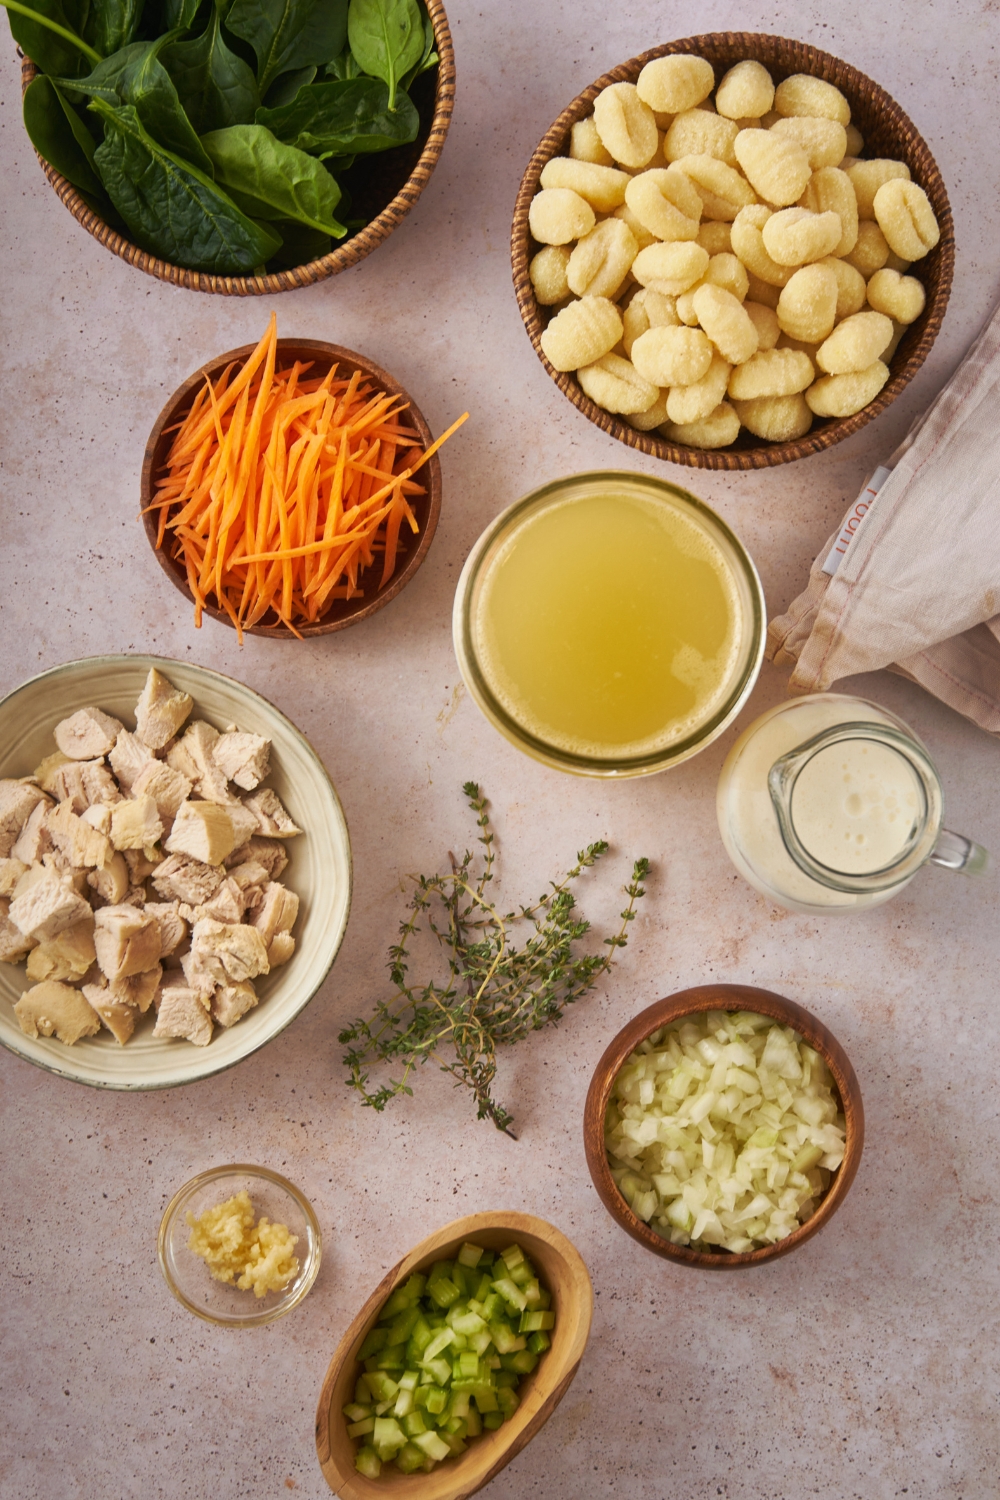 Overhead view of an assortment of ingredients including bowls of shredded carrots, potato gnocchi, diced chicken, diced onion, diced celery, and chicken broth.